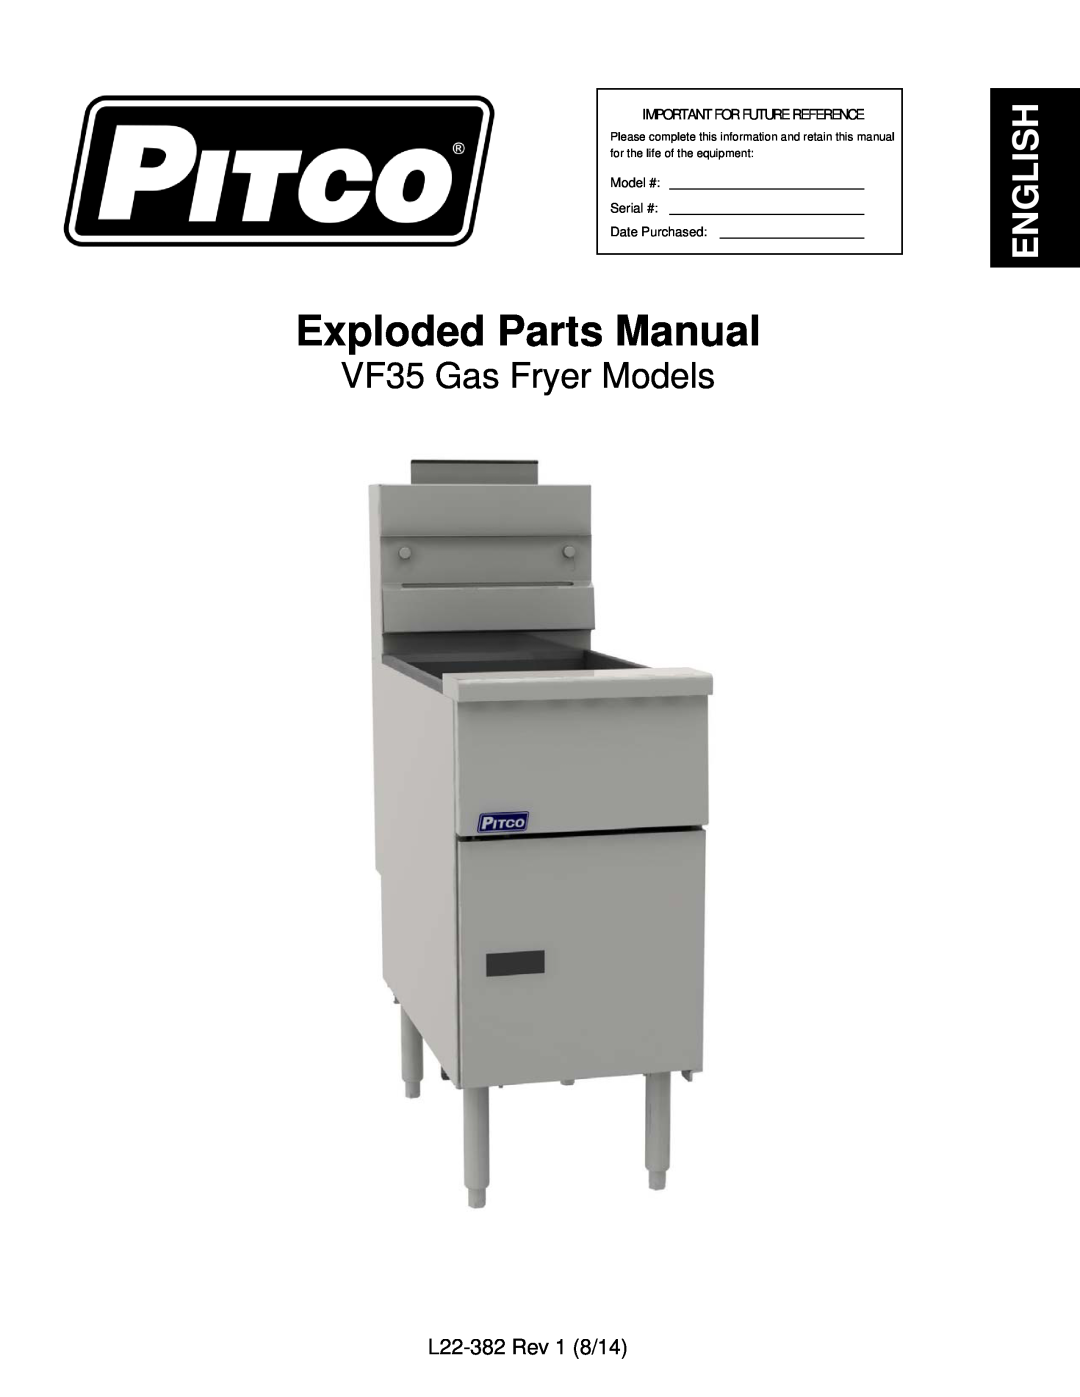 Pitco Frialator operation manual NO OPTION/STAND ALONE Covering Model VF35, Model #, Serial #, Date Purchased 